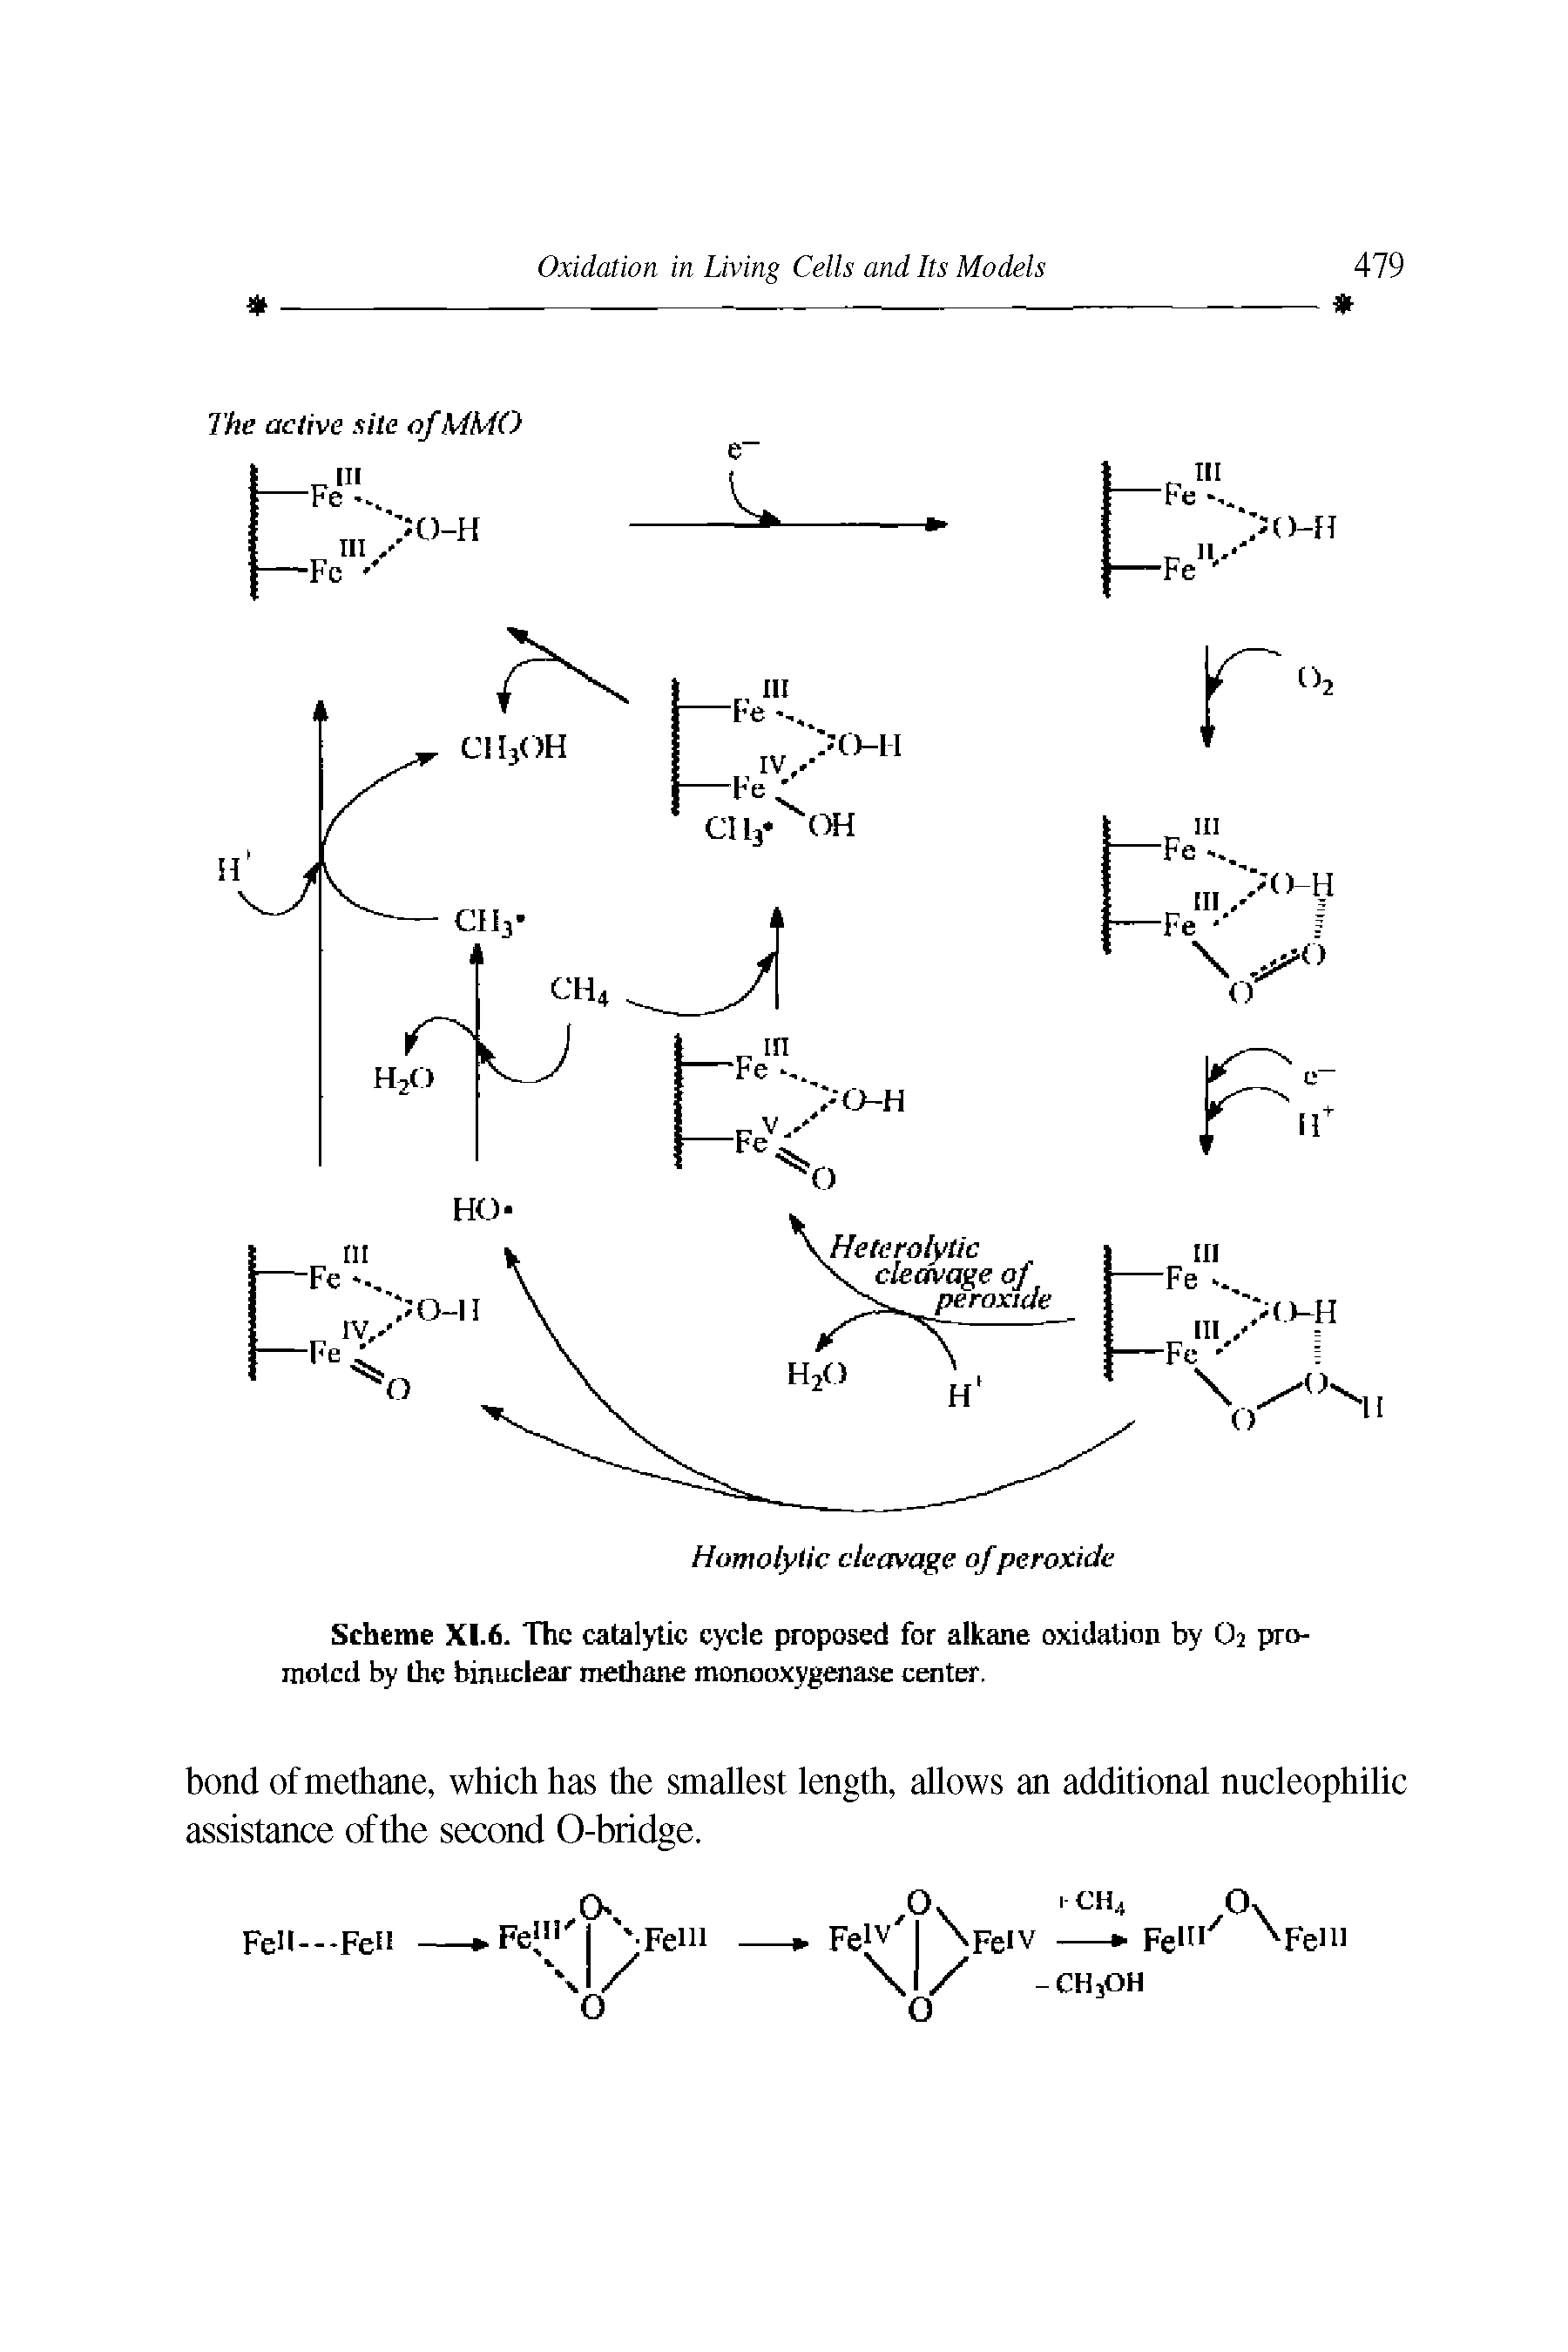 Scheme XI.6. The catalytic cycle proposed for alkane oxidation by Oi promoted by the binuclear methane monooxygenase center.